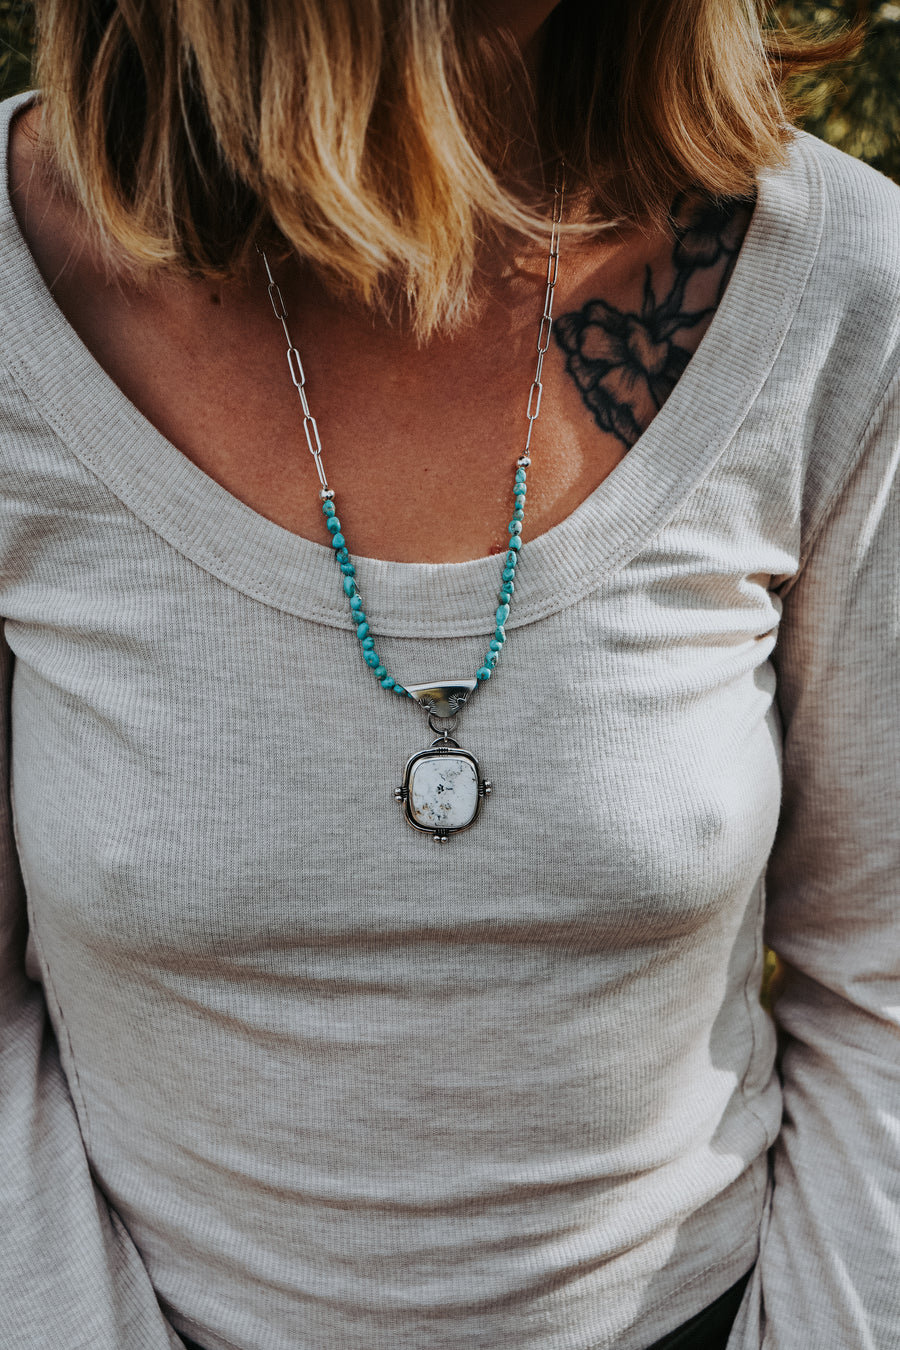 Statement Necklace in White Buffalo with Kingman Turquoise Bead Chain